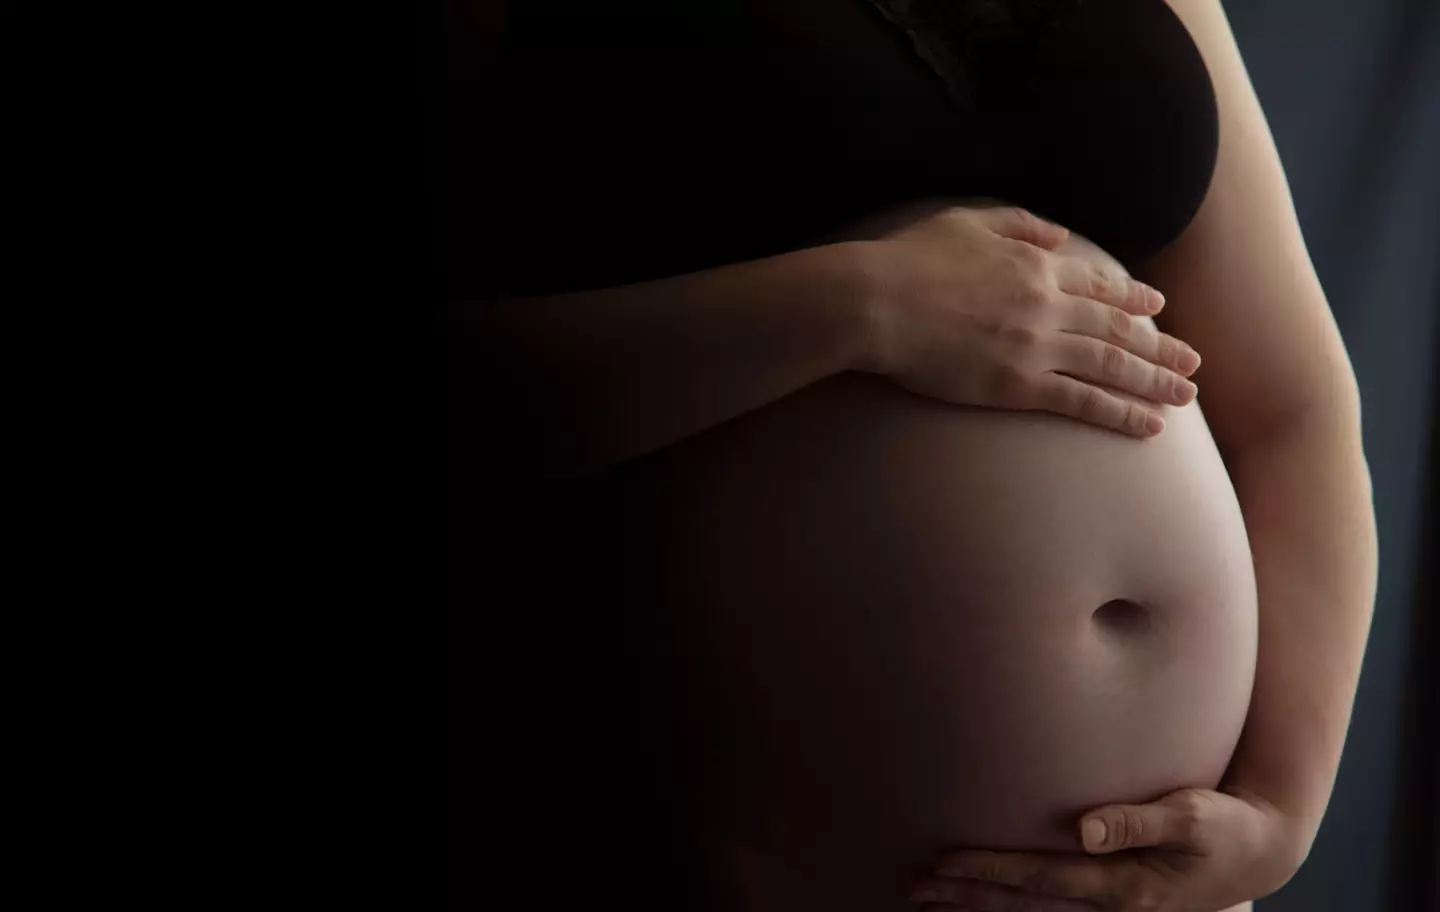 A teenager with mental health difficulties has given birth after doctors were given permission to perform a caesarean section.